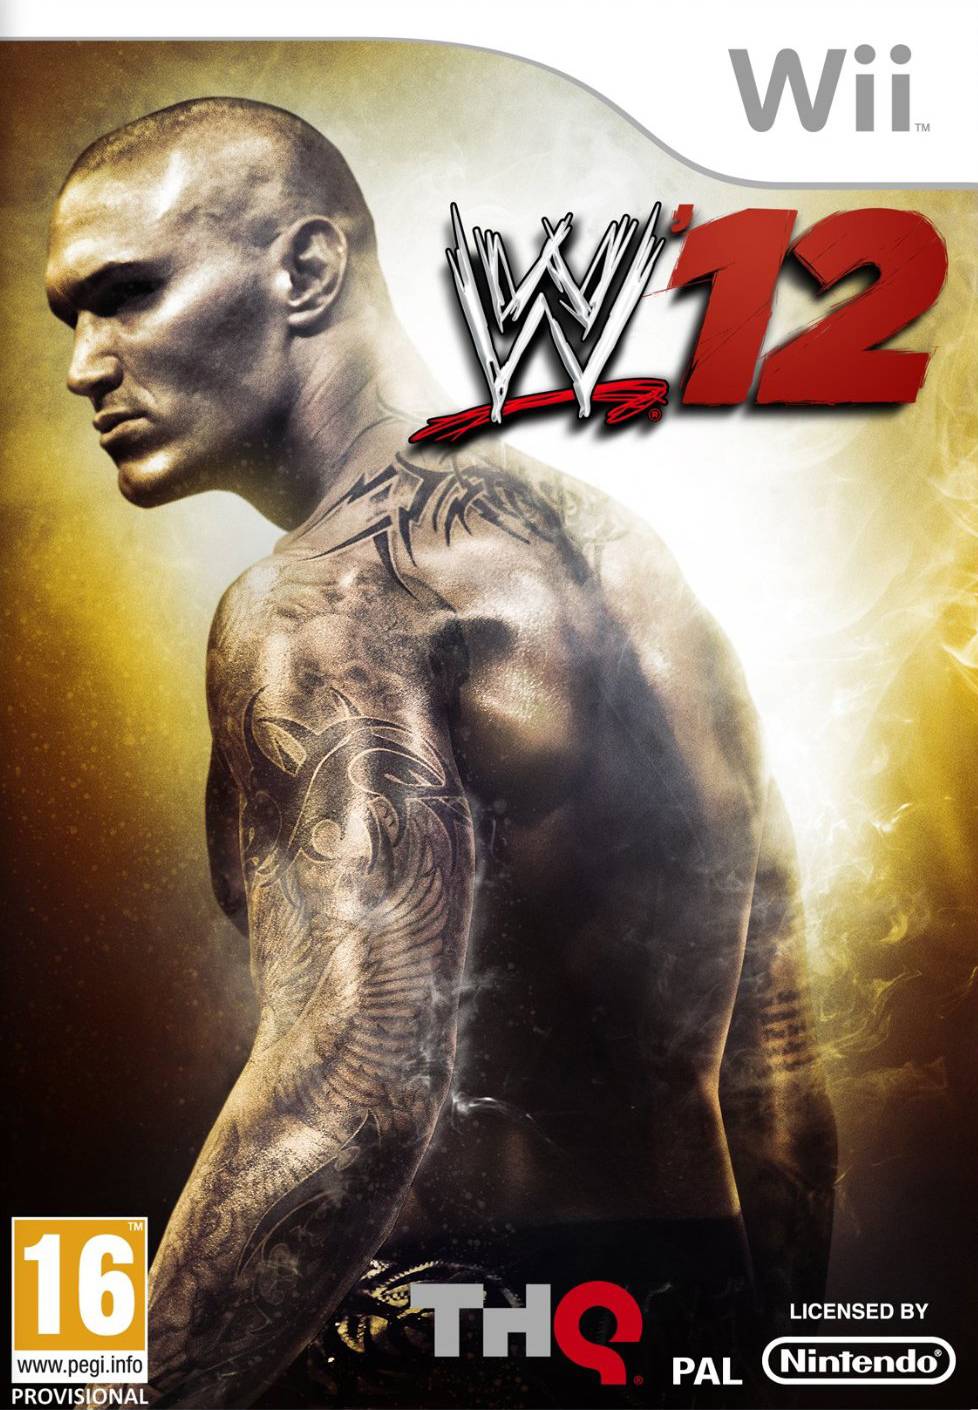 jaquette-cover-boxart-wwe-12-thq-nintendo-wii